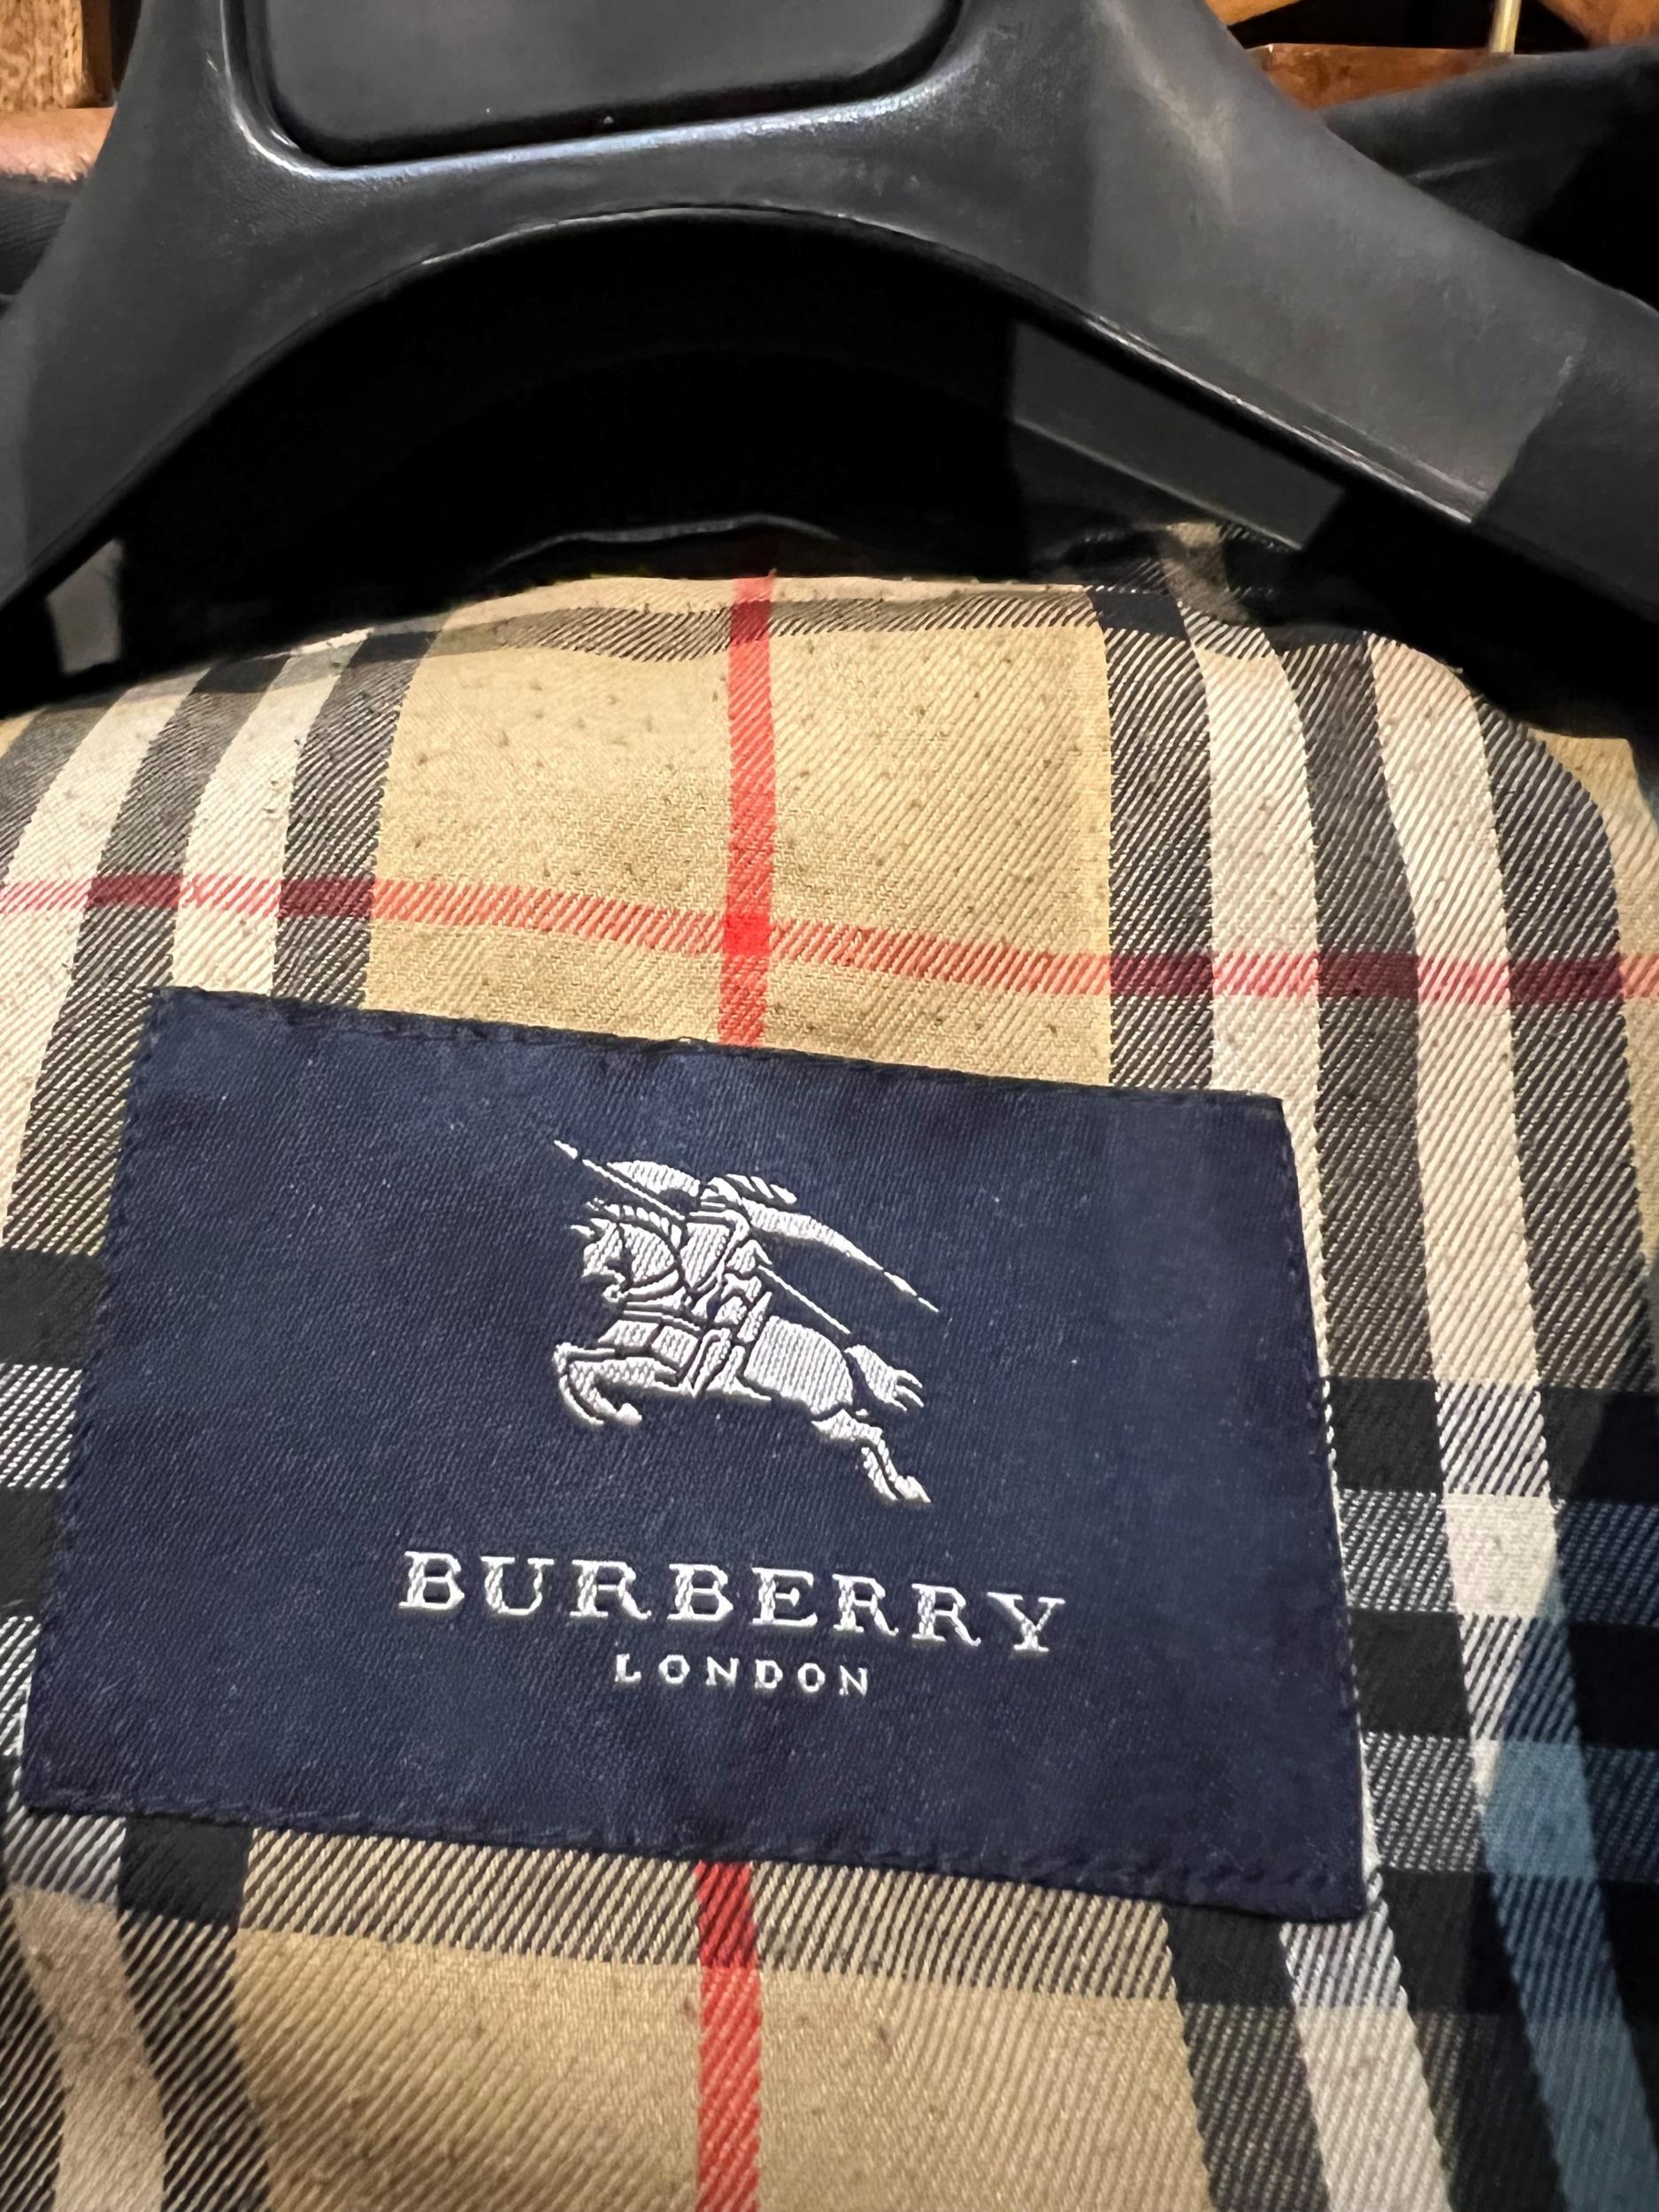 BURBERRY, A TRENCH COAT. (size M) - Image 5 of 5